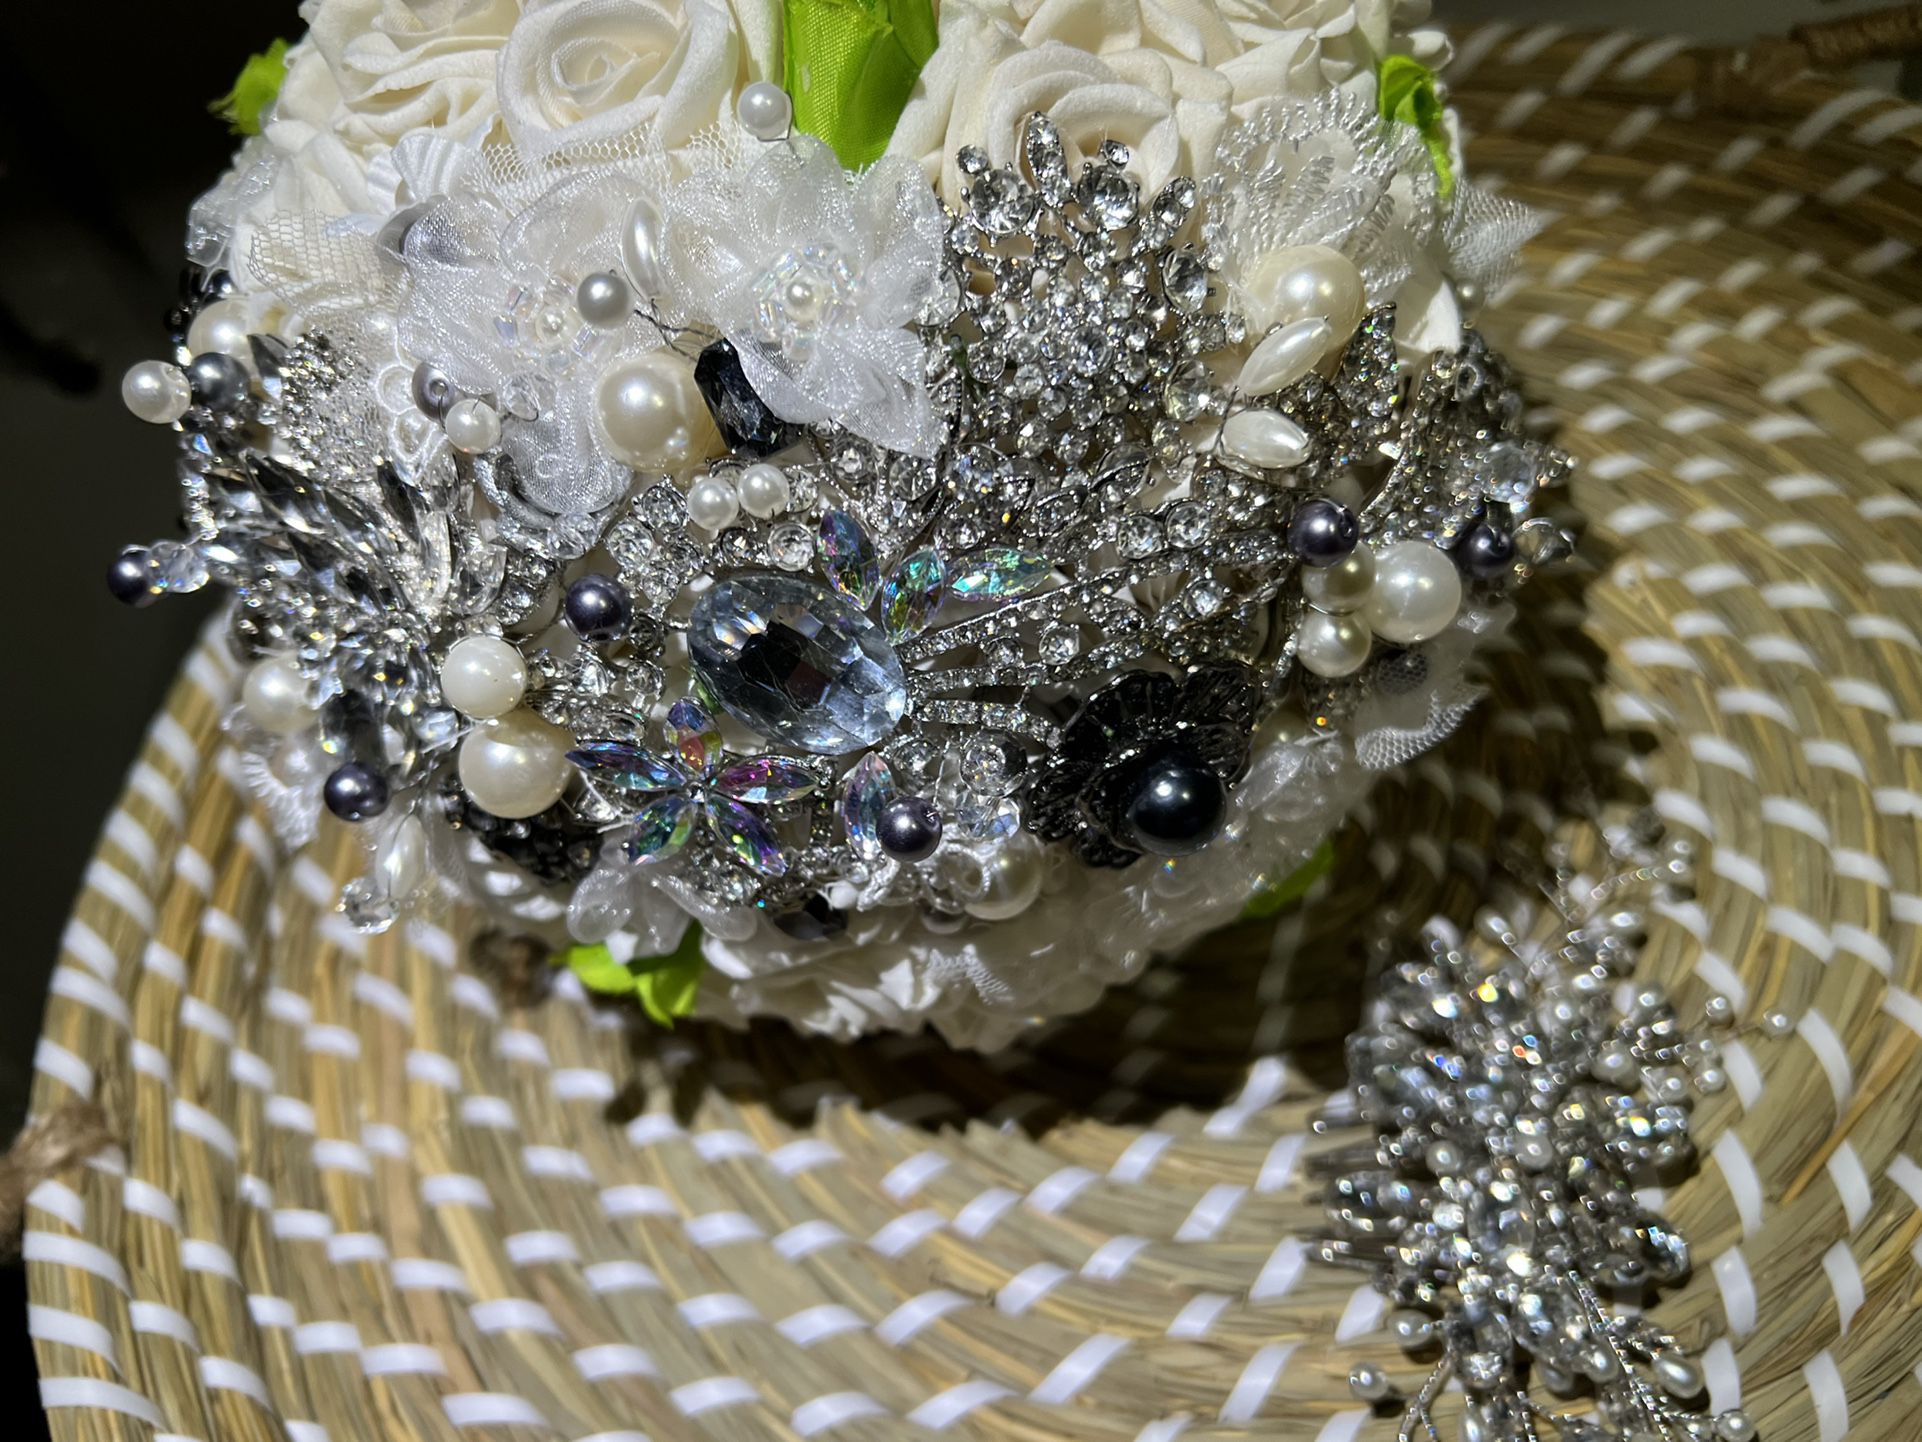 Bridal wedding accessories with crystals